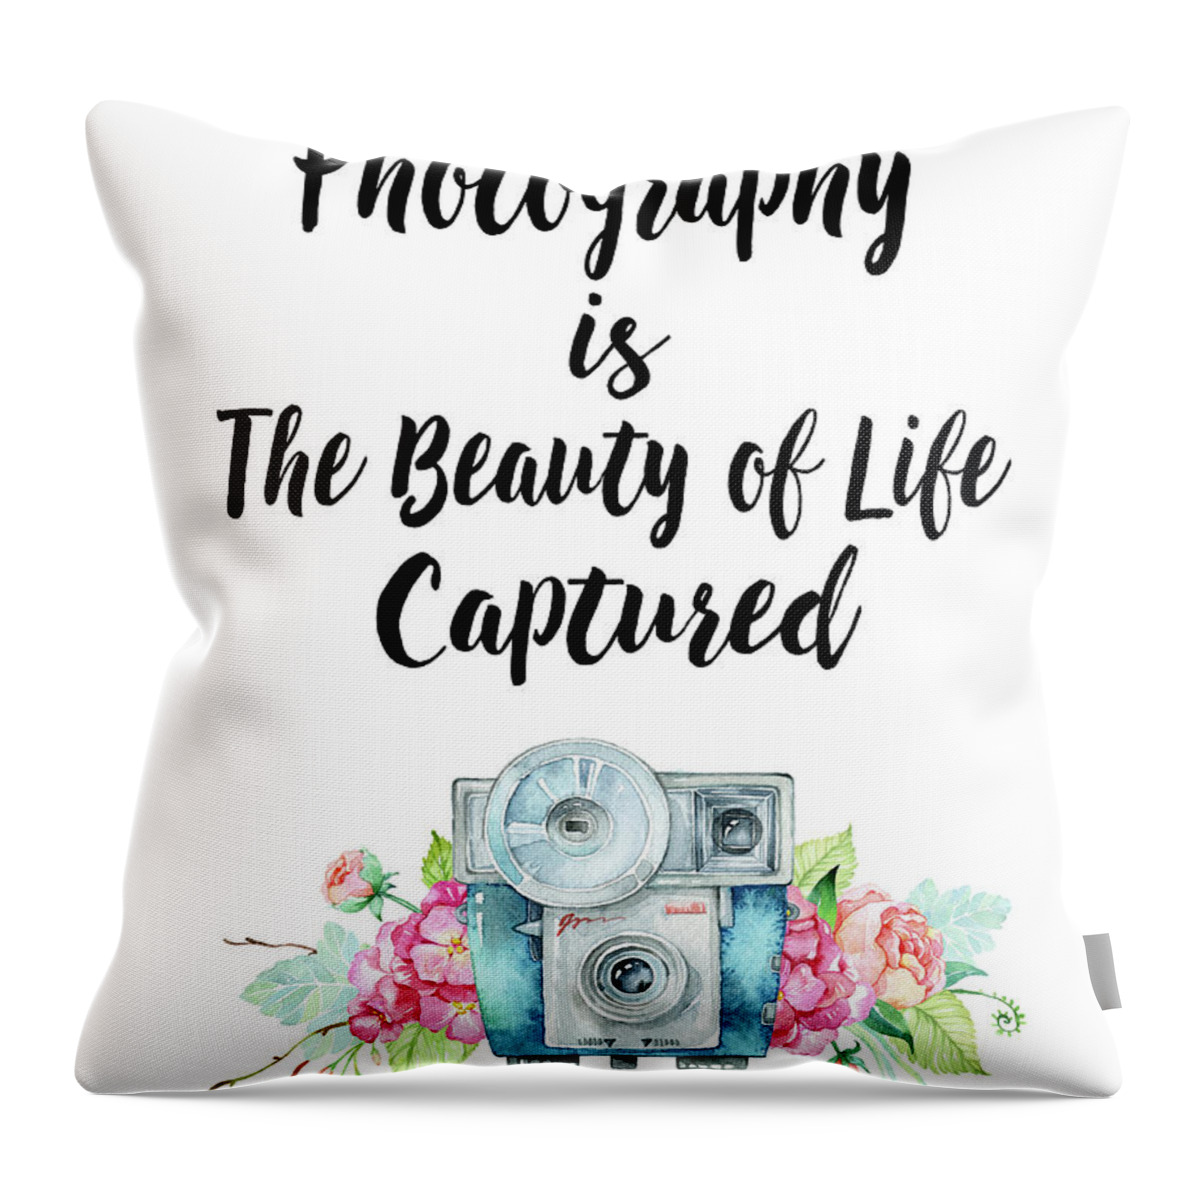 Photographs Throw Pillow featuring the digital art The Beauty of Life by Colleen Taylor